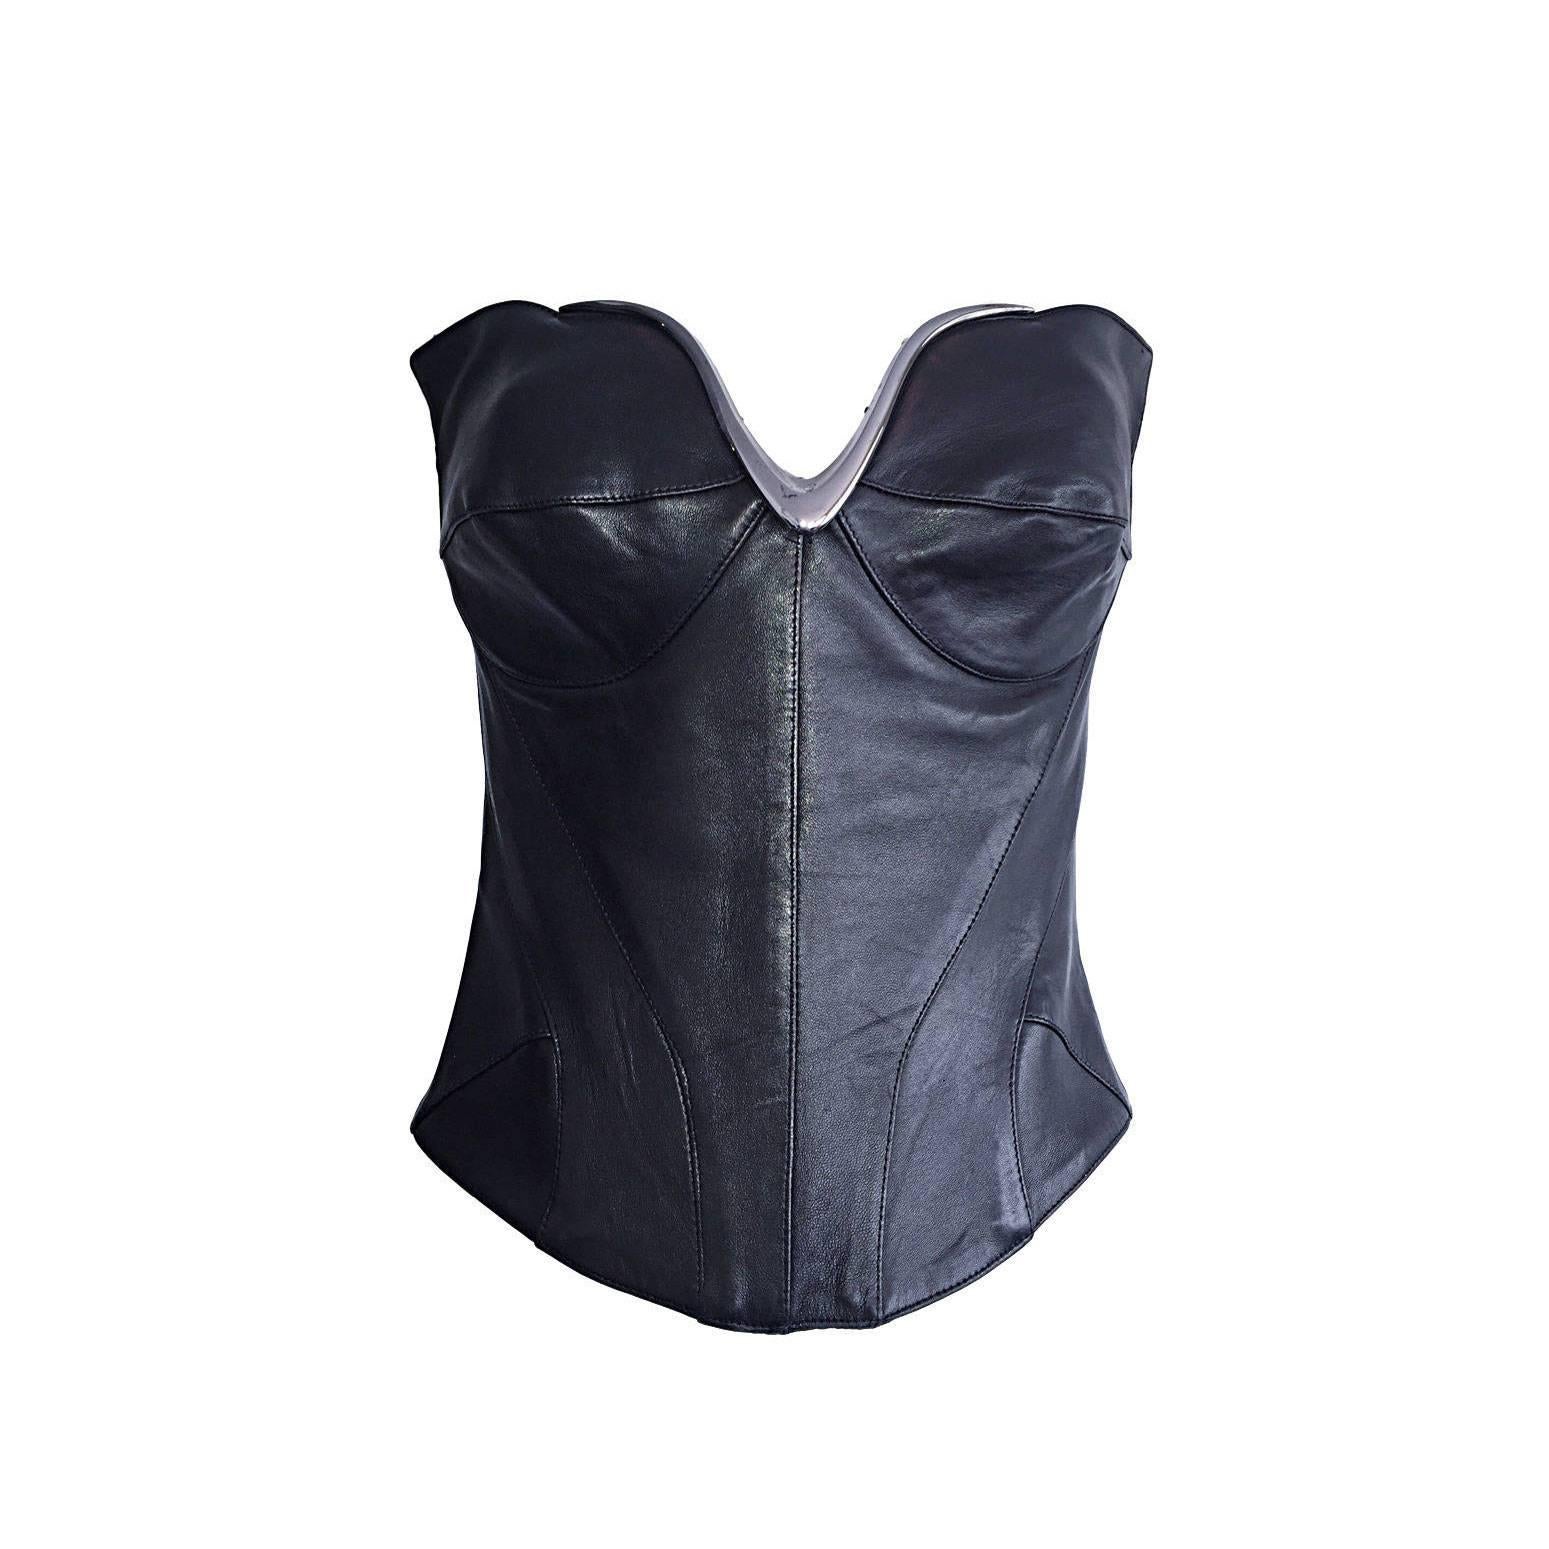 Iconic Vintage Thierry Mugler Couture Black Leather Space Age Corset Bustier